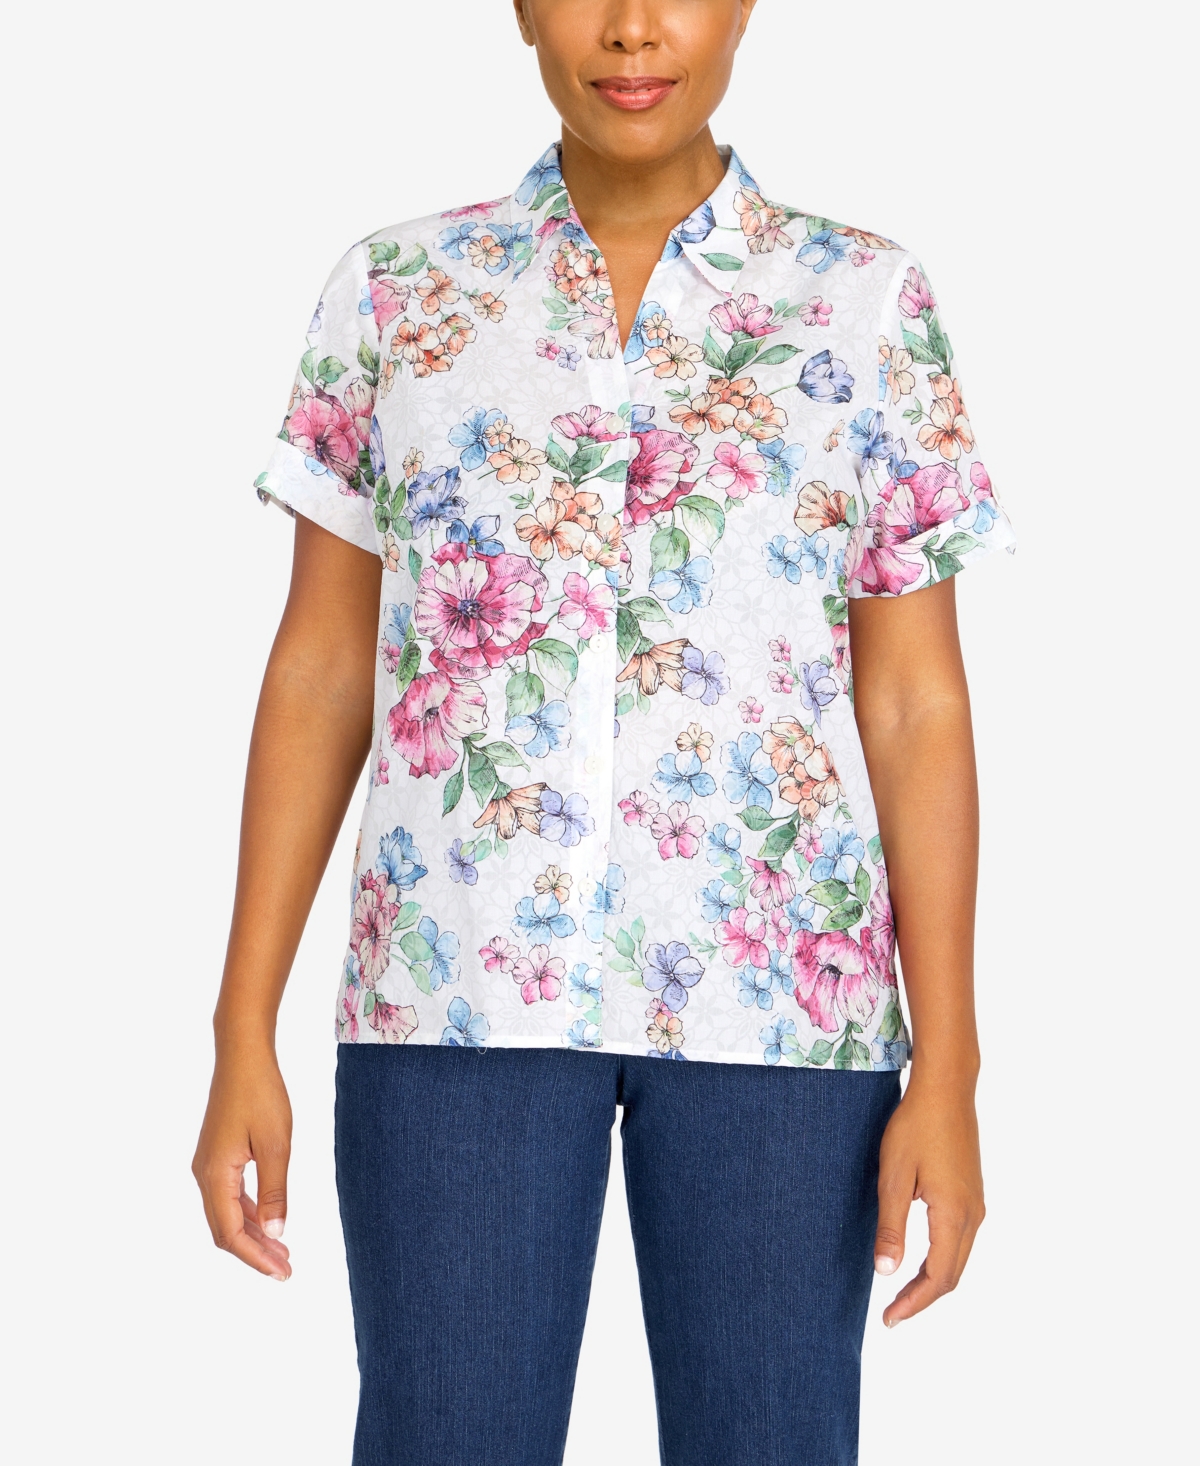 ALFRED DUNNER PETITE CLASSICS WATERCOLOR FLORAL SHORT SLEEVE BUTTON DOWN TOP